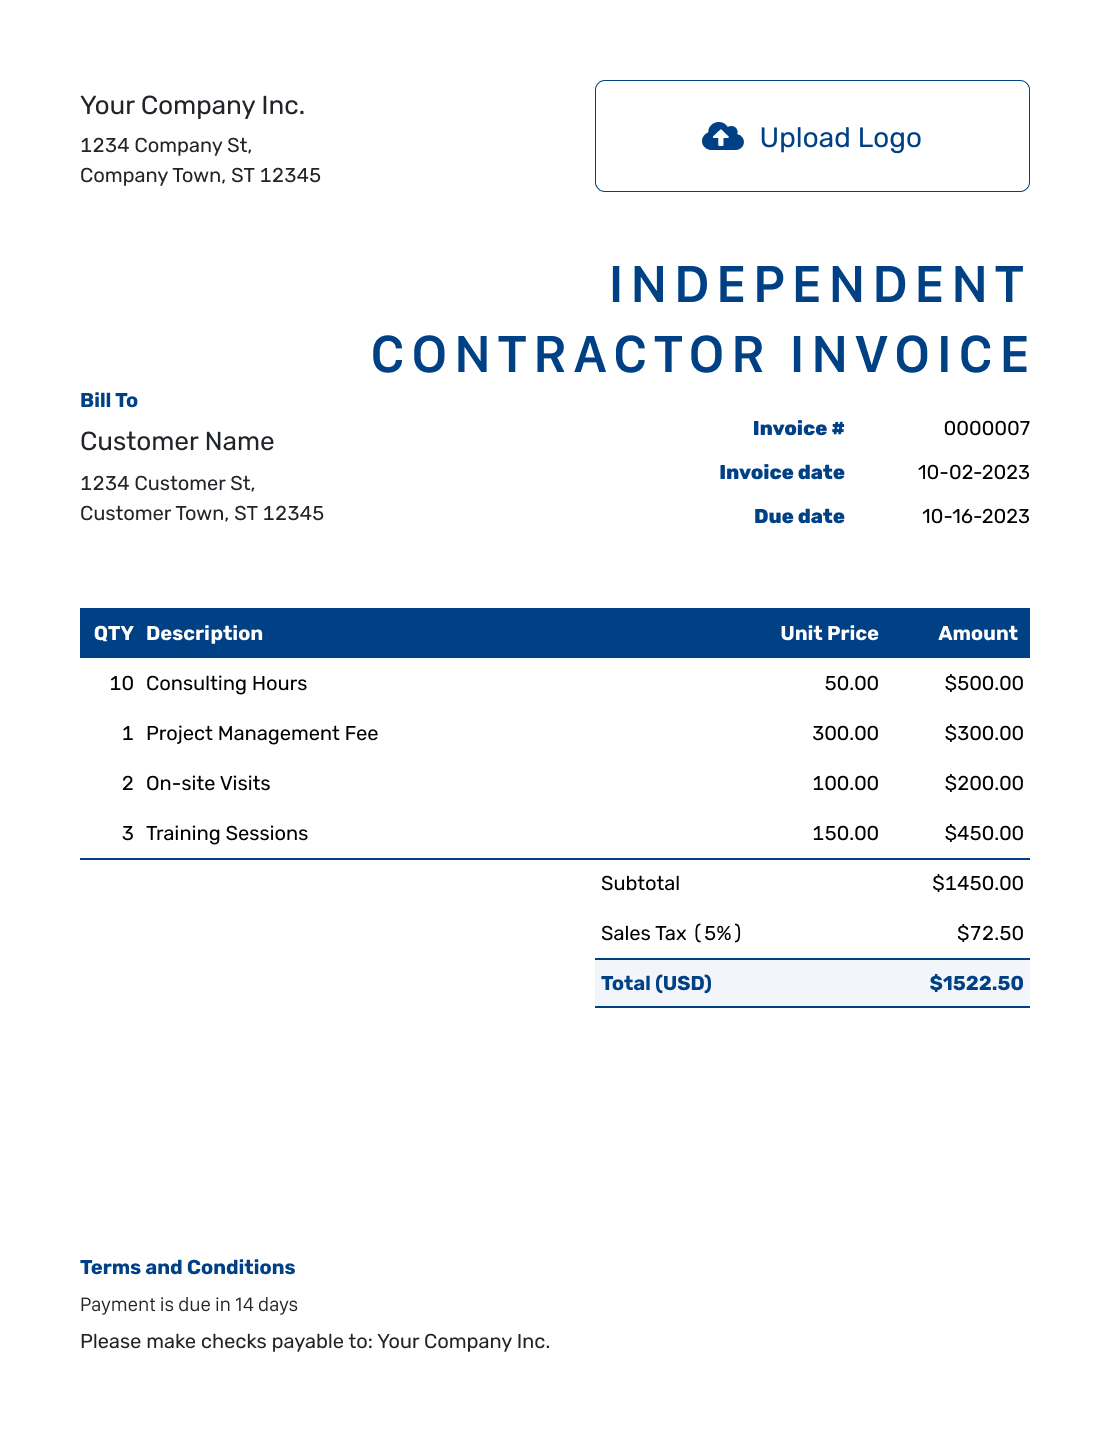 Sample Independent Contractor Invoice Template